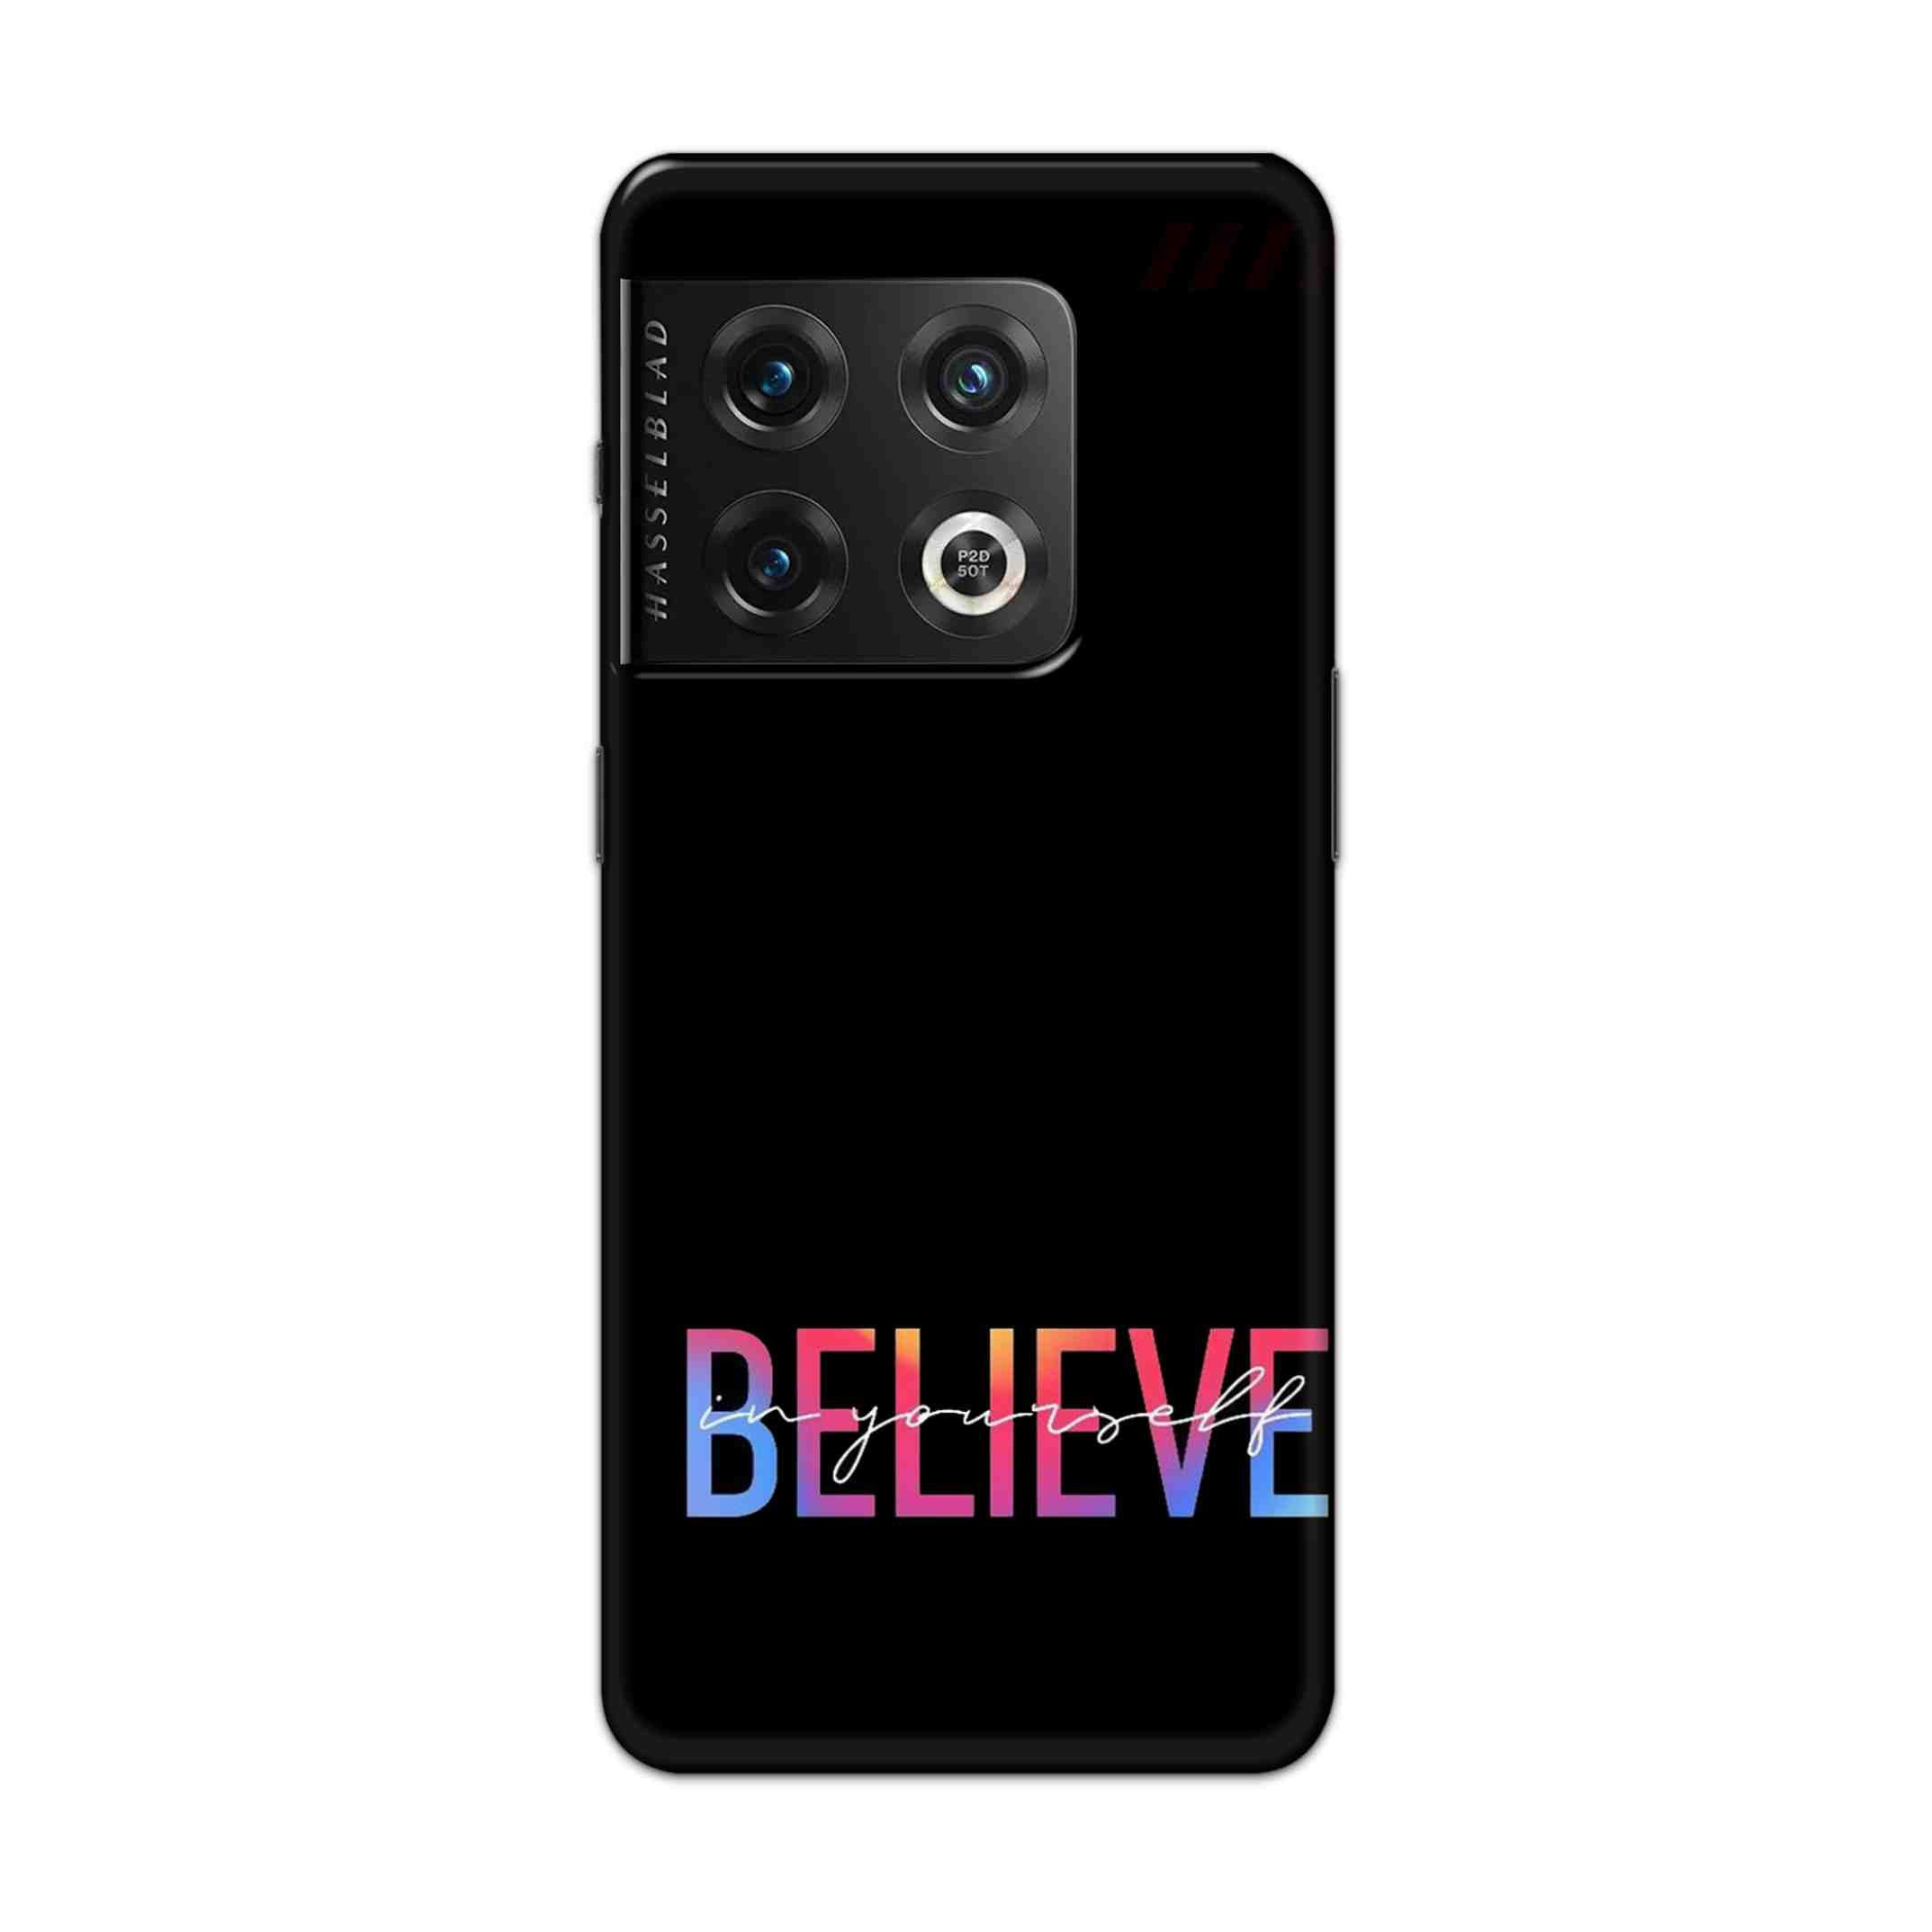 Buy Believe Hard Back Mobile Phone Case Cover For Oneplus 10 Pro Online